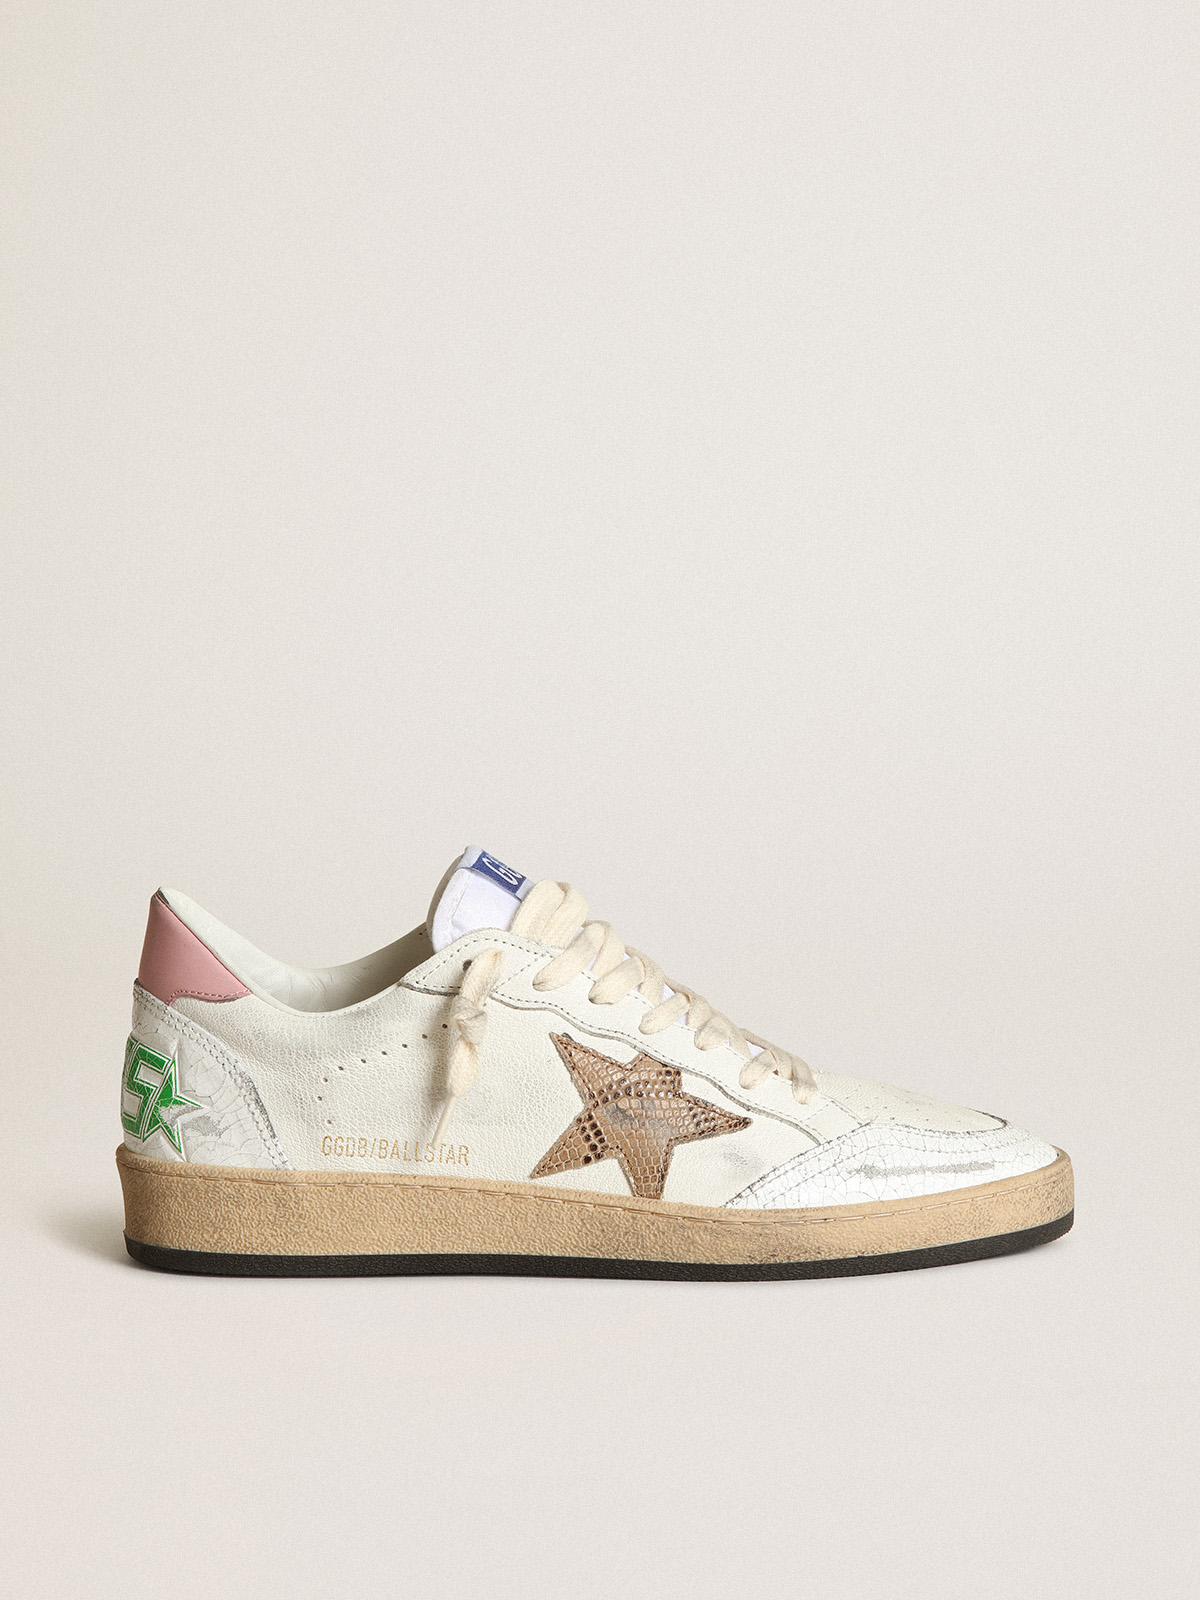 Ball Star in nappa with beige snake-print leather star and pink heel tab |  Golden Goose